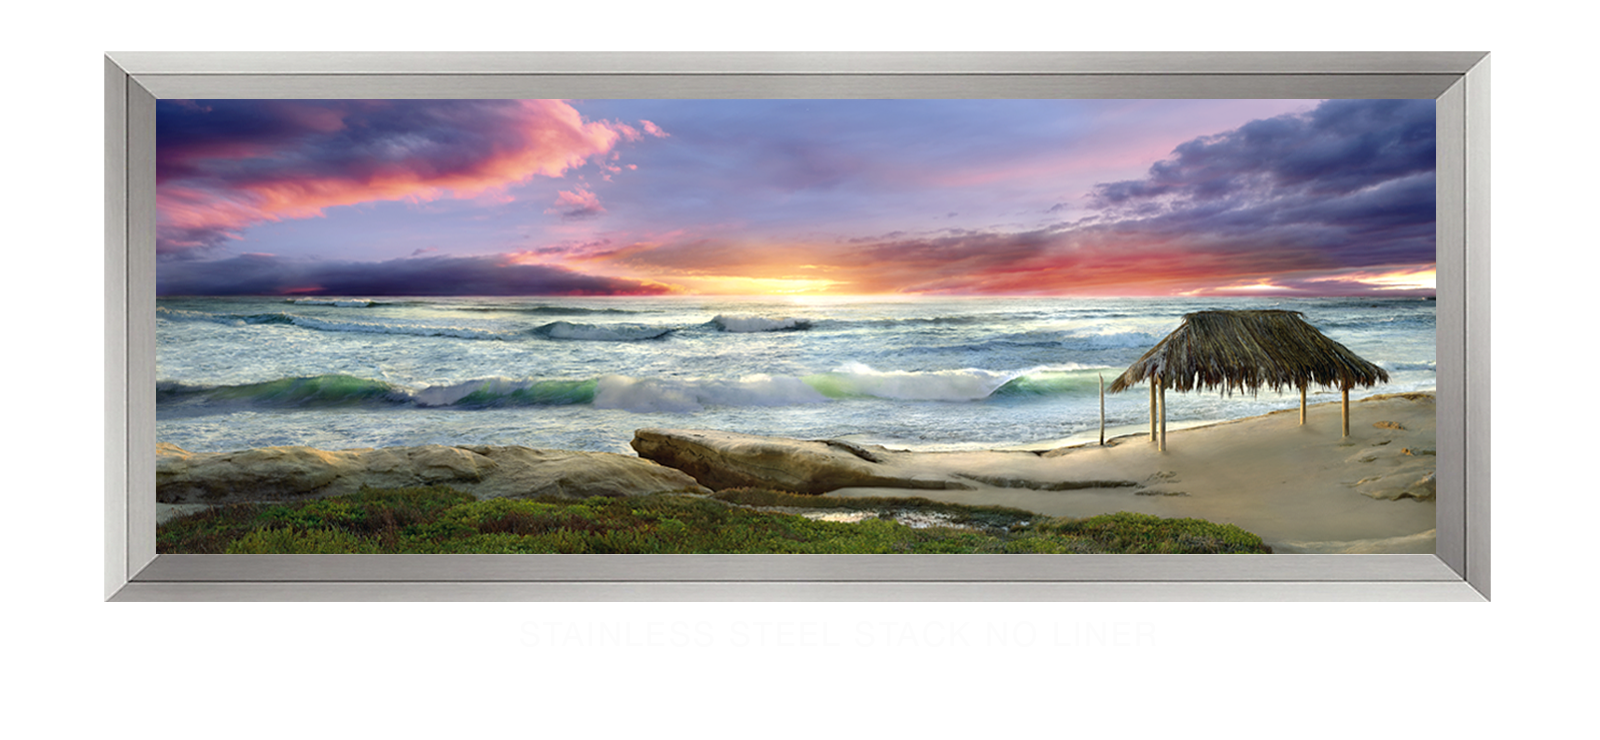 7AWAITANCE Stainless Steel Stack No Liner T